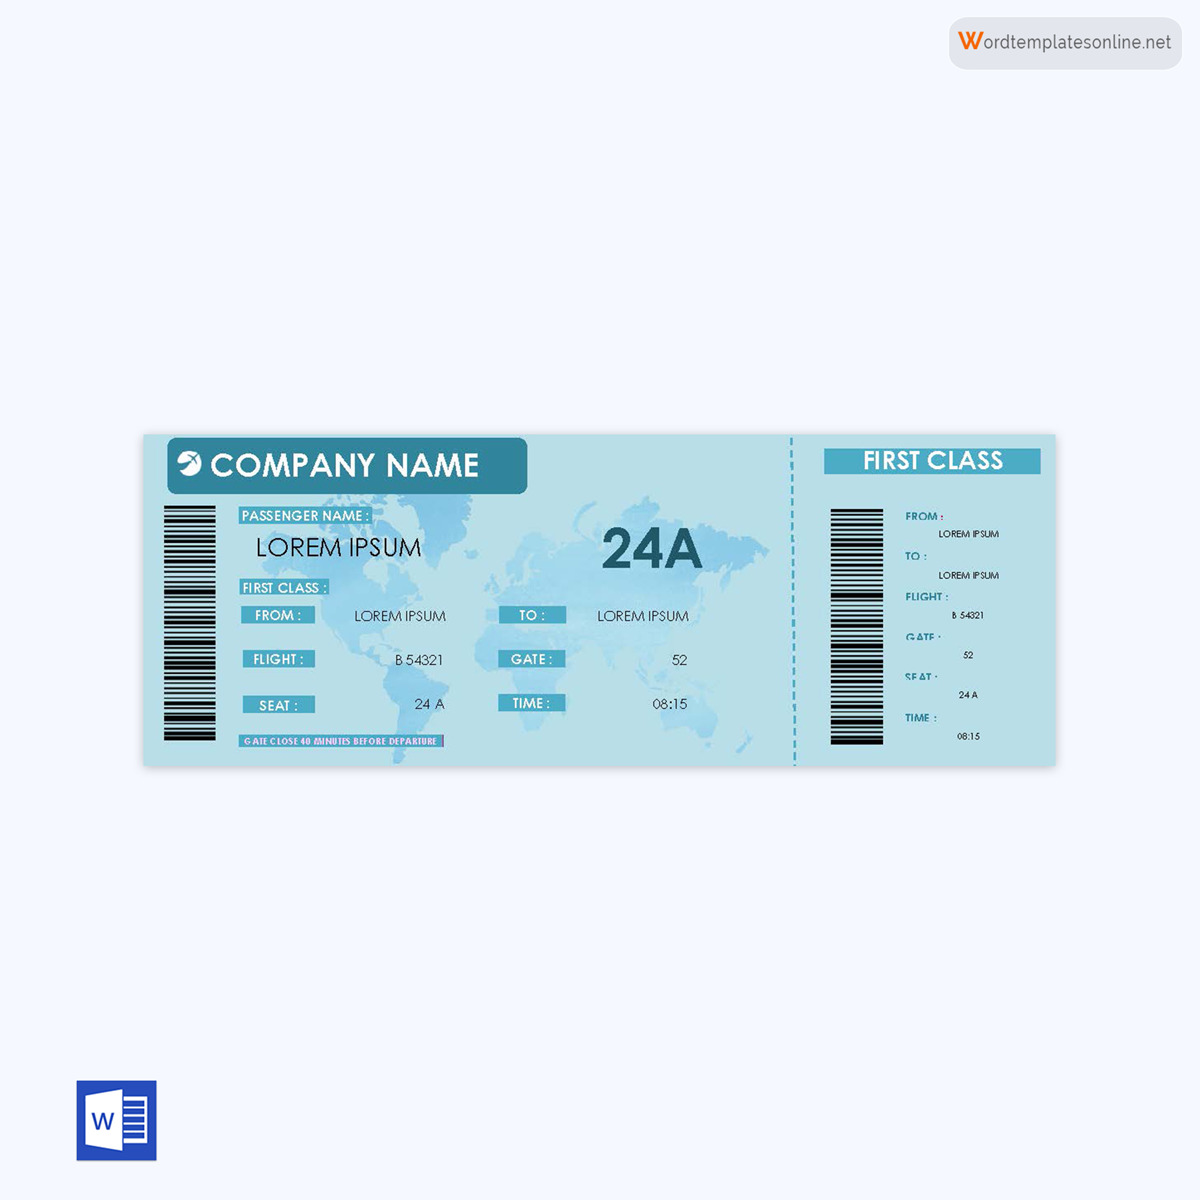 Boarding Pass Template - Free Example for Travelers